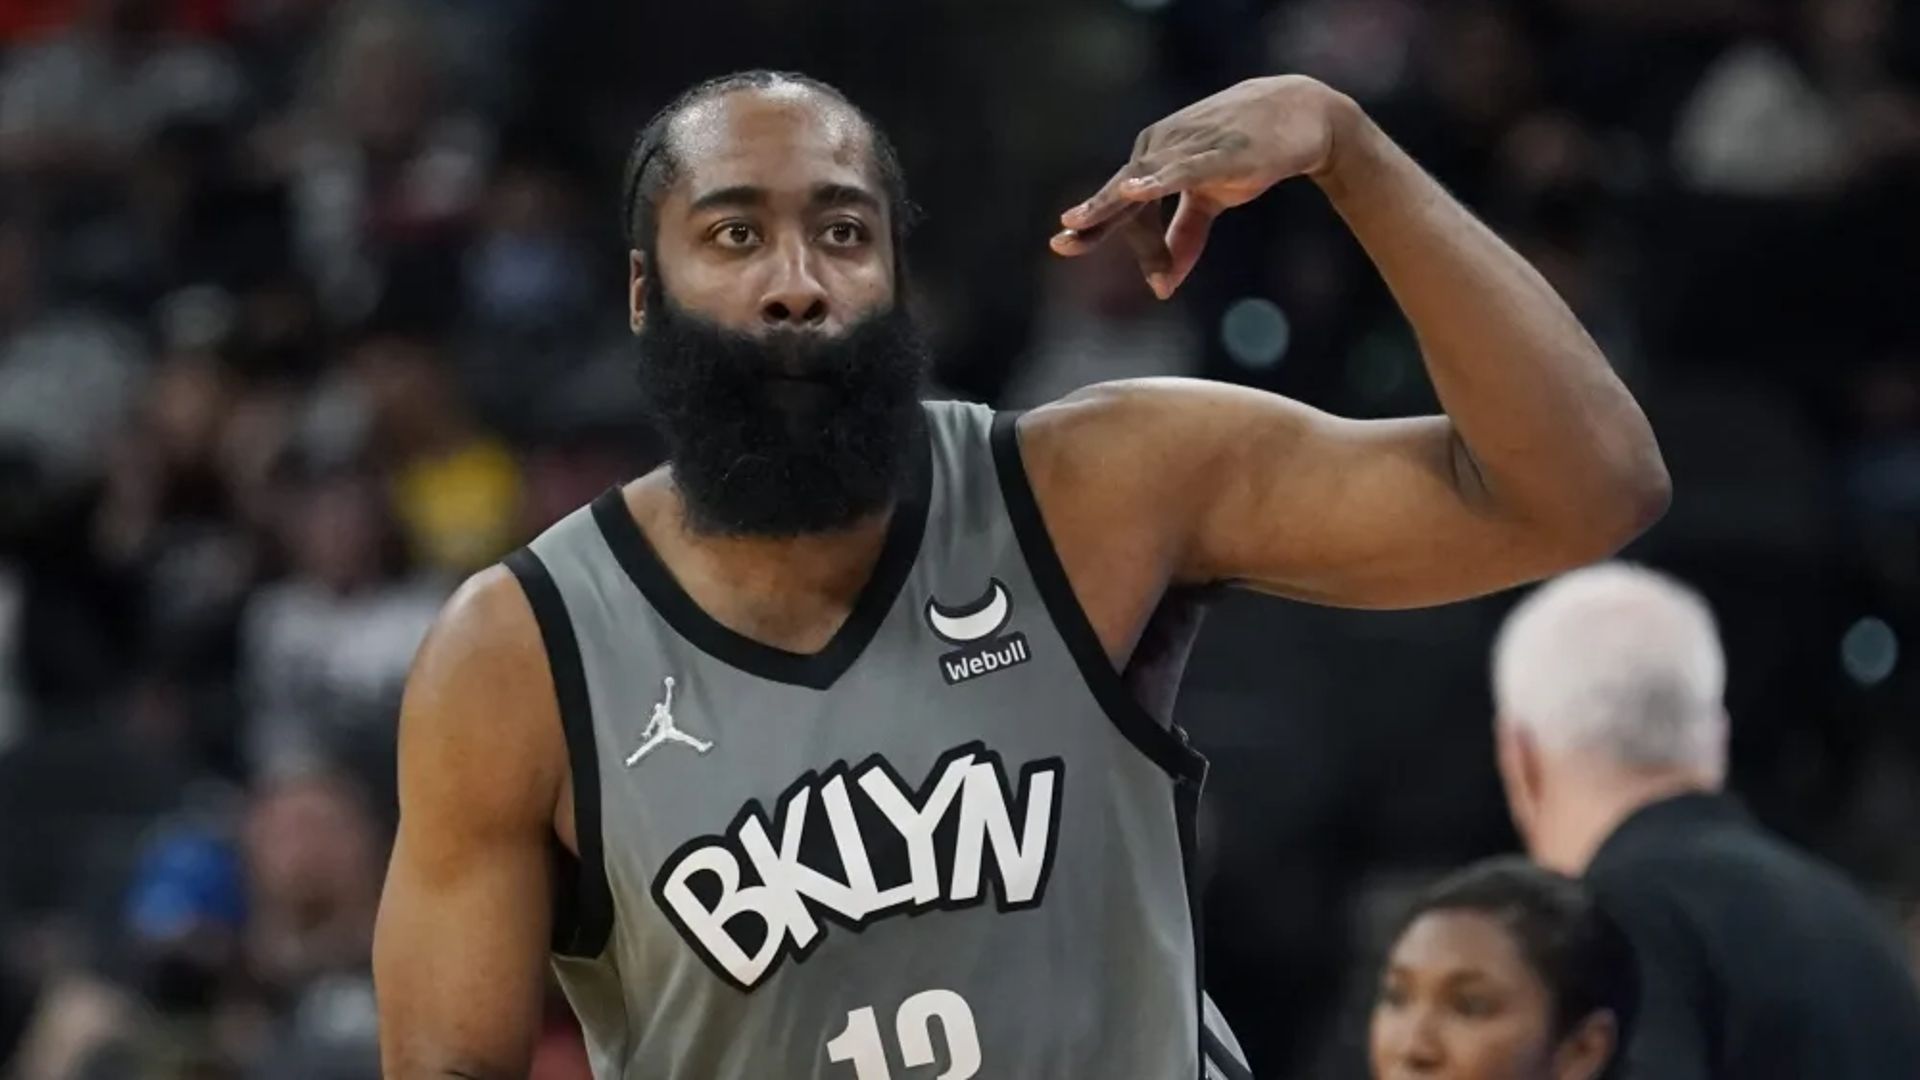 James Harden in a file photo. (Image credits: twitter)